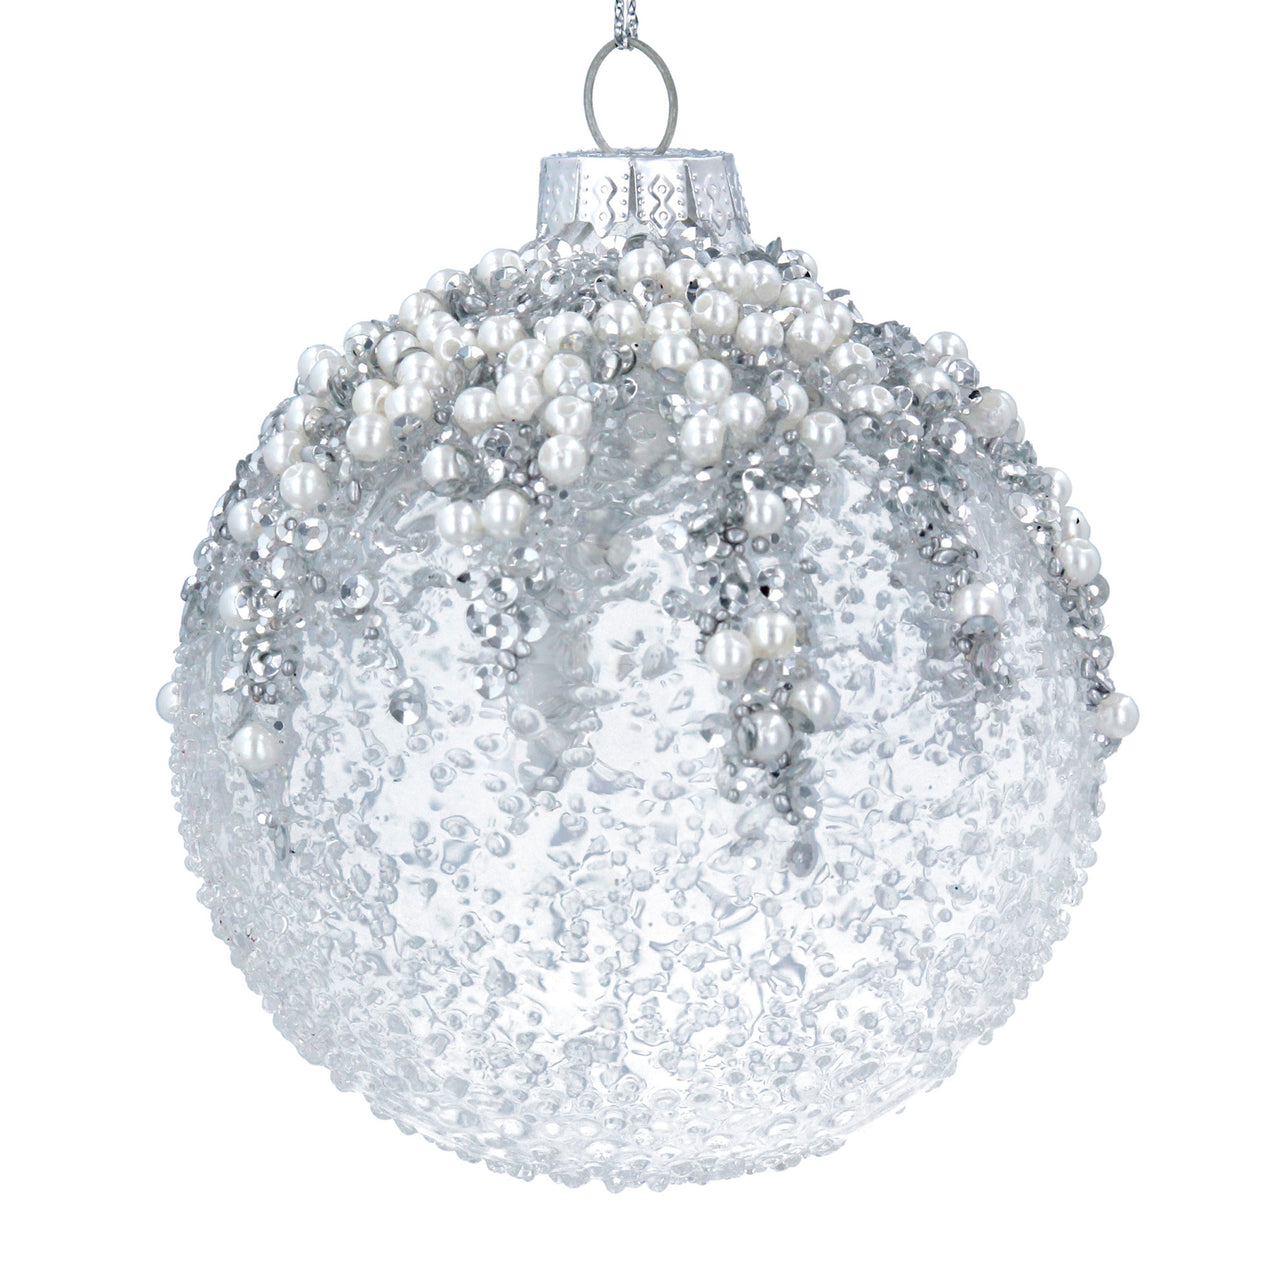 Crushed Clear Glass Ball with Silver Glitter & Pearls Tree Decoration